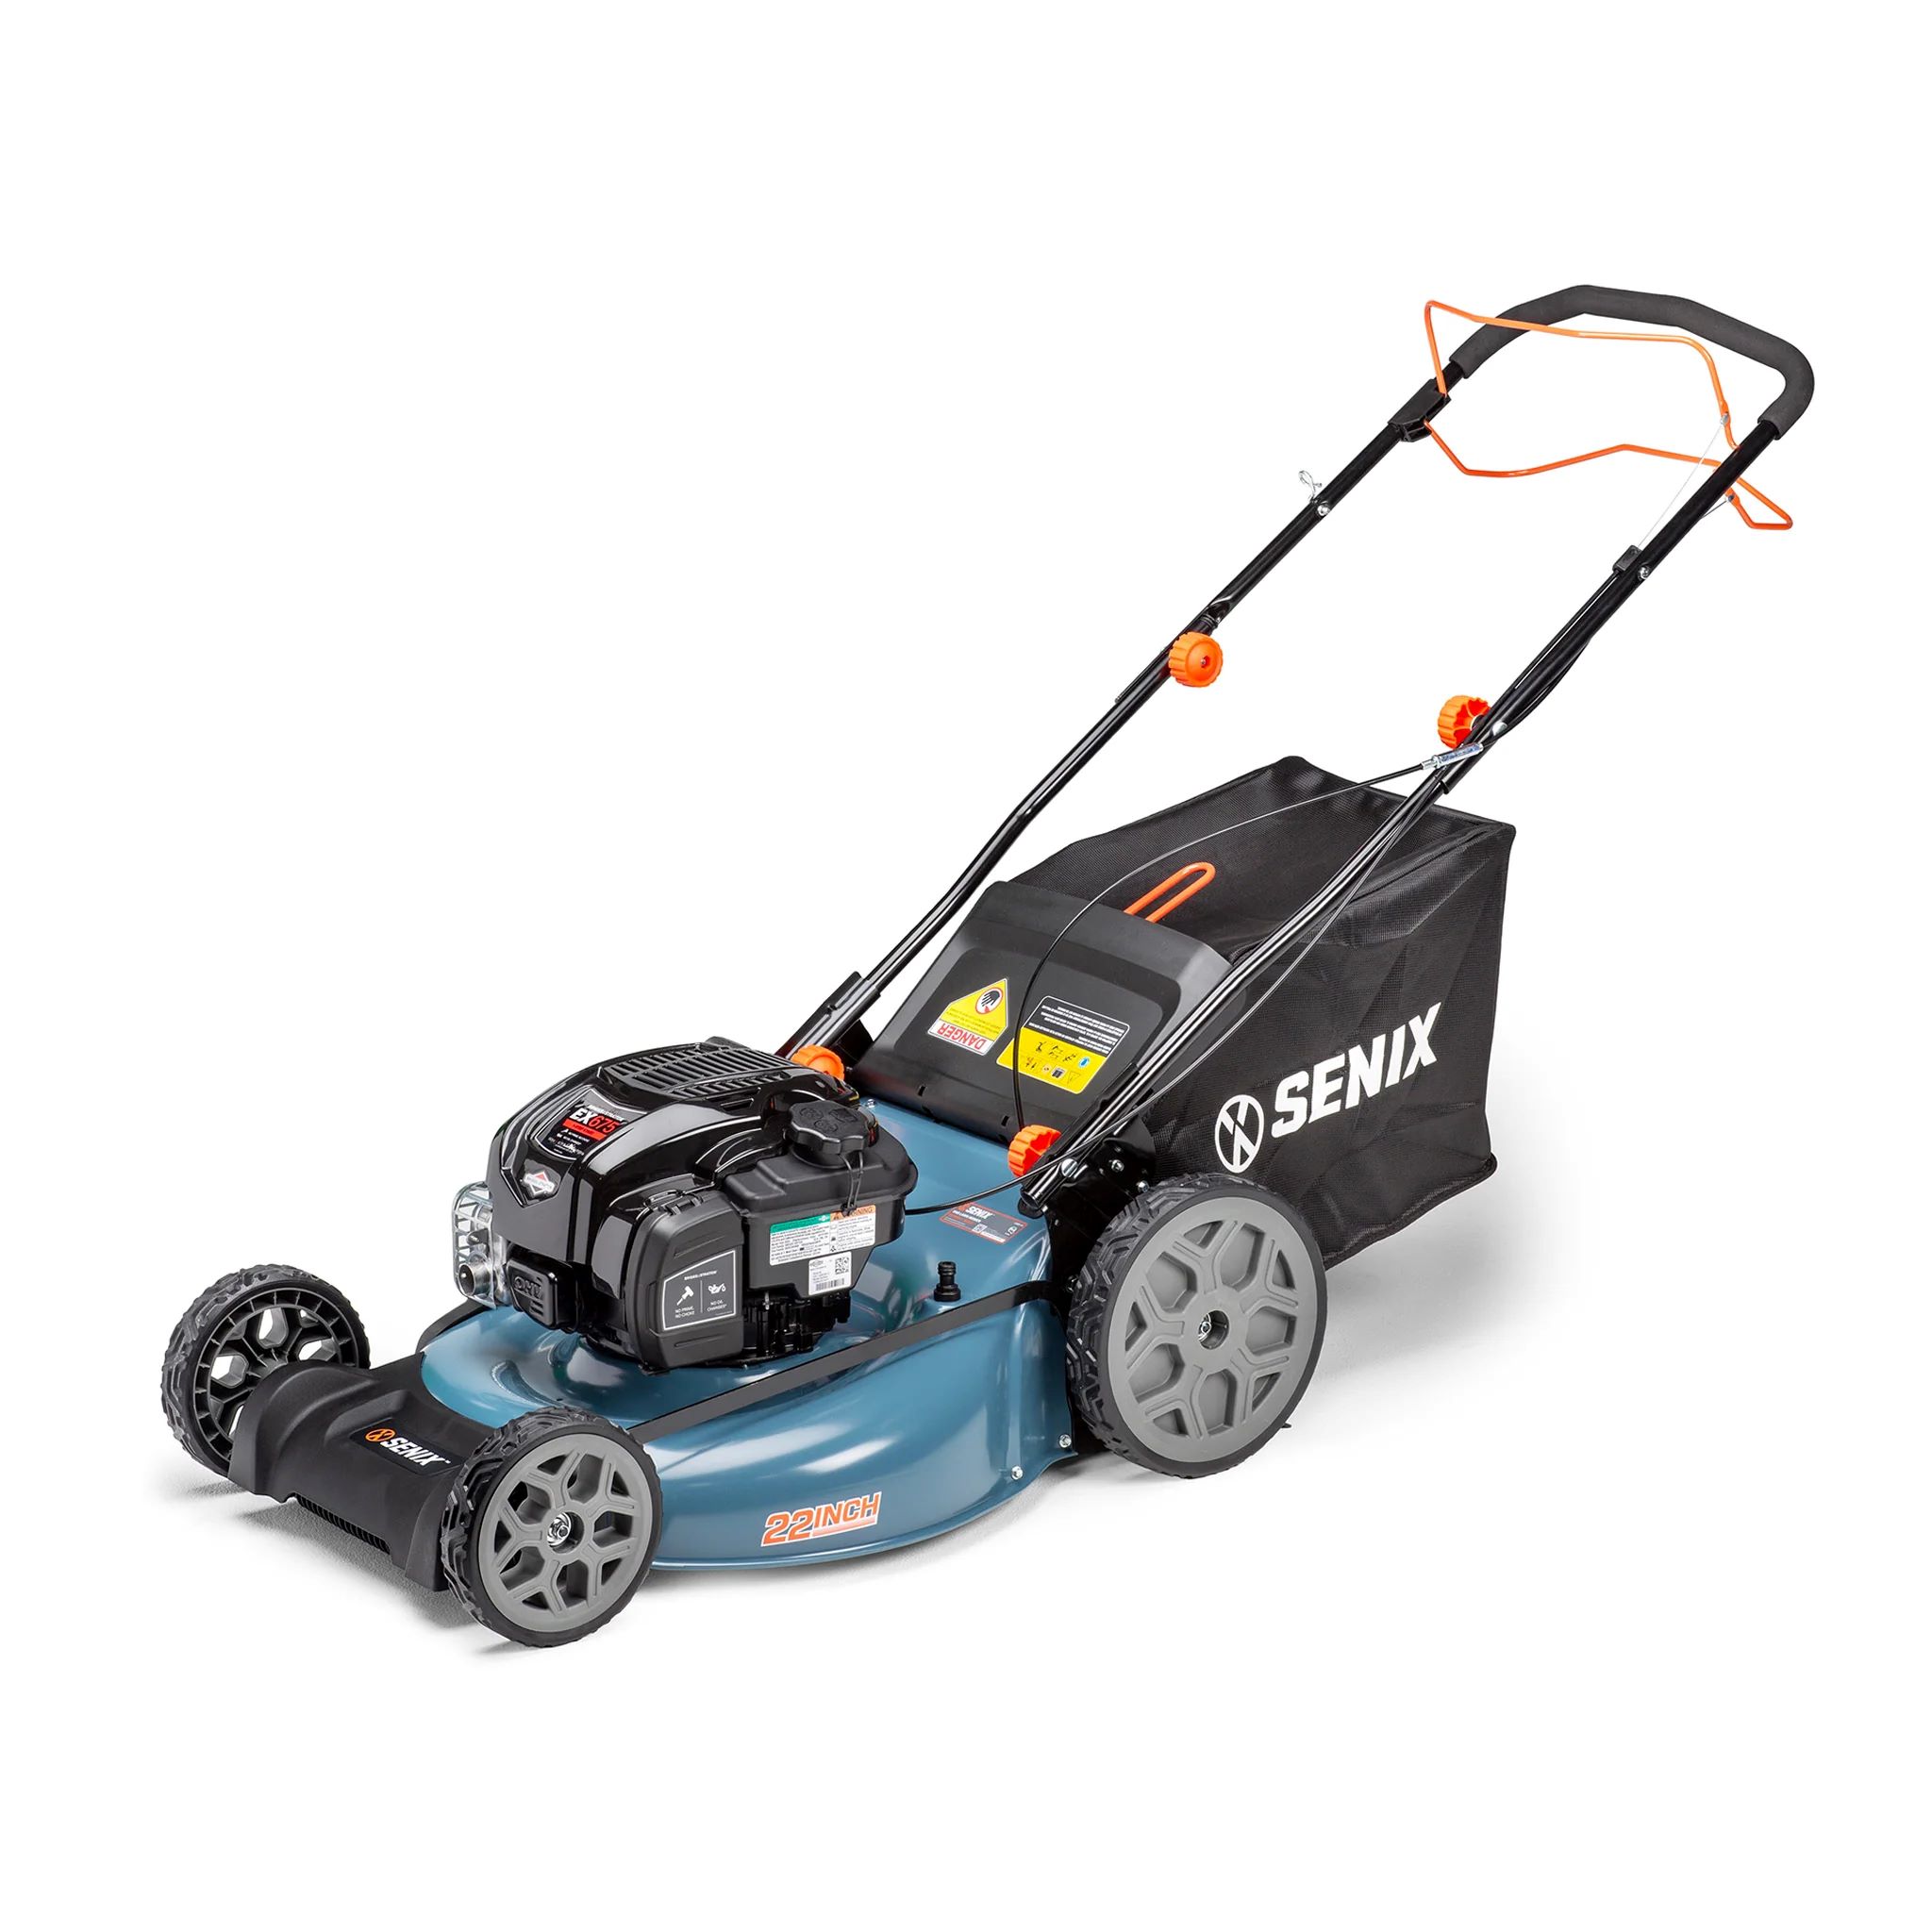 22-Inch 163 cc 4-Cycle Gas Powered Self-Propelled Lawn Mower